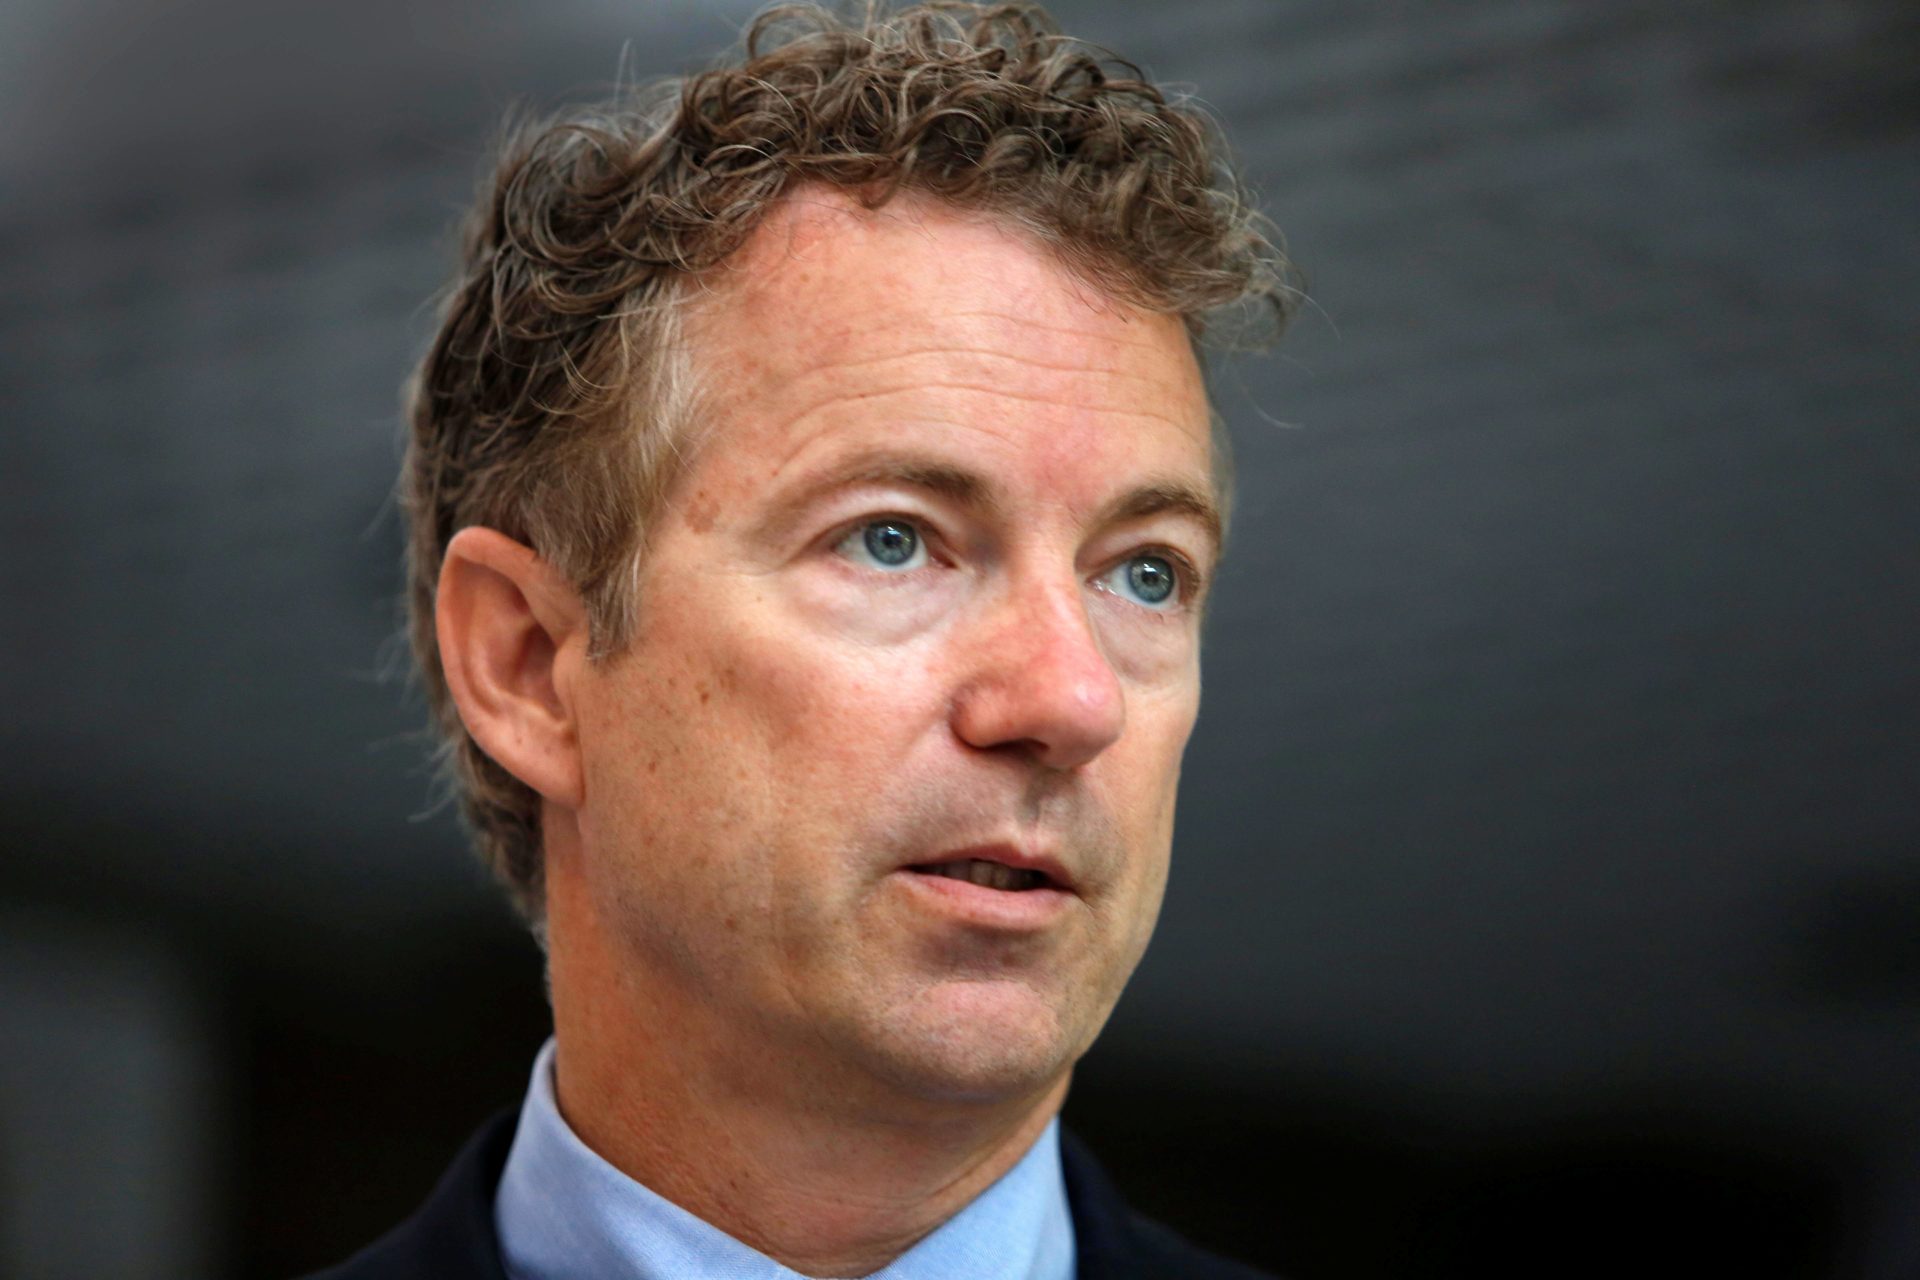 WATCH: Rand Paul Speaks out on Attack by Neighbor, Says Injuries He Suffered Left Him ...